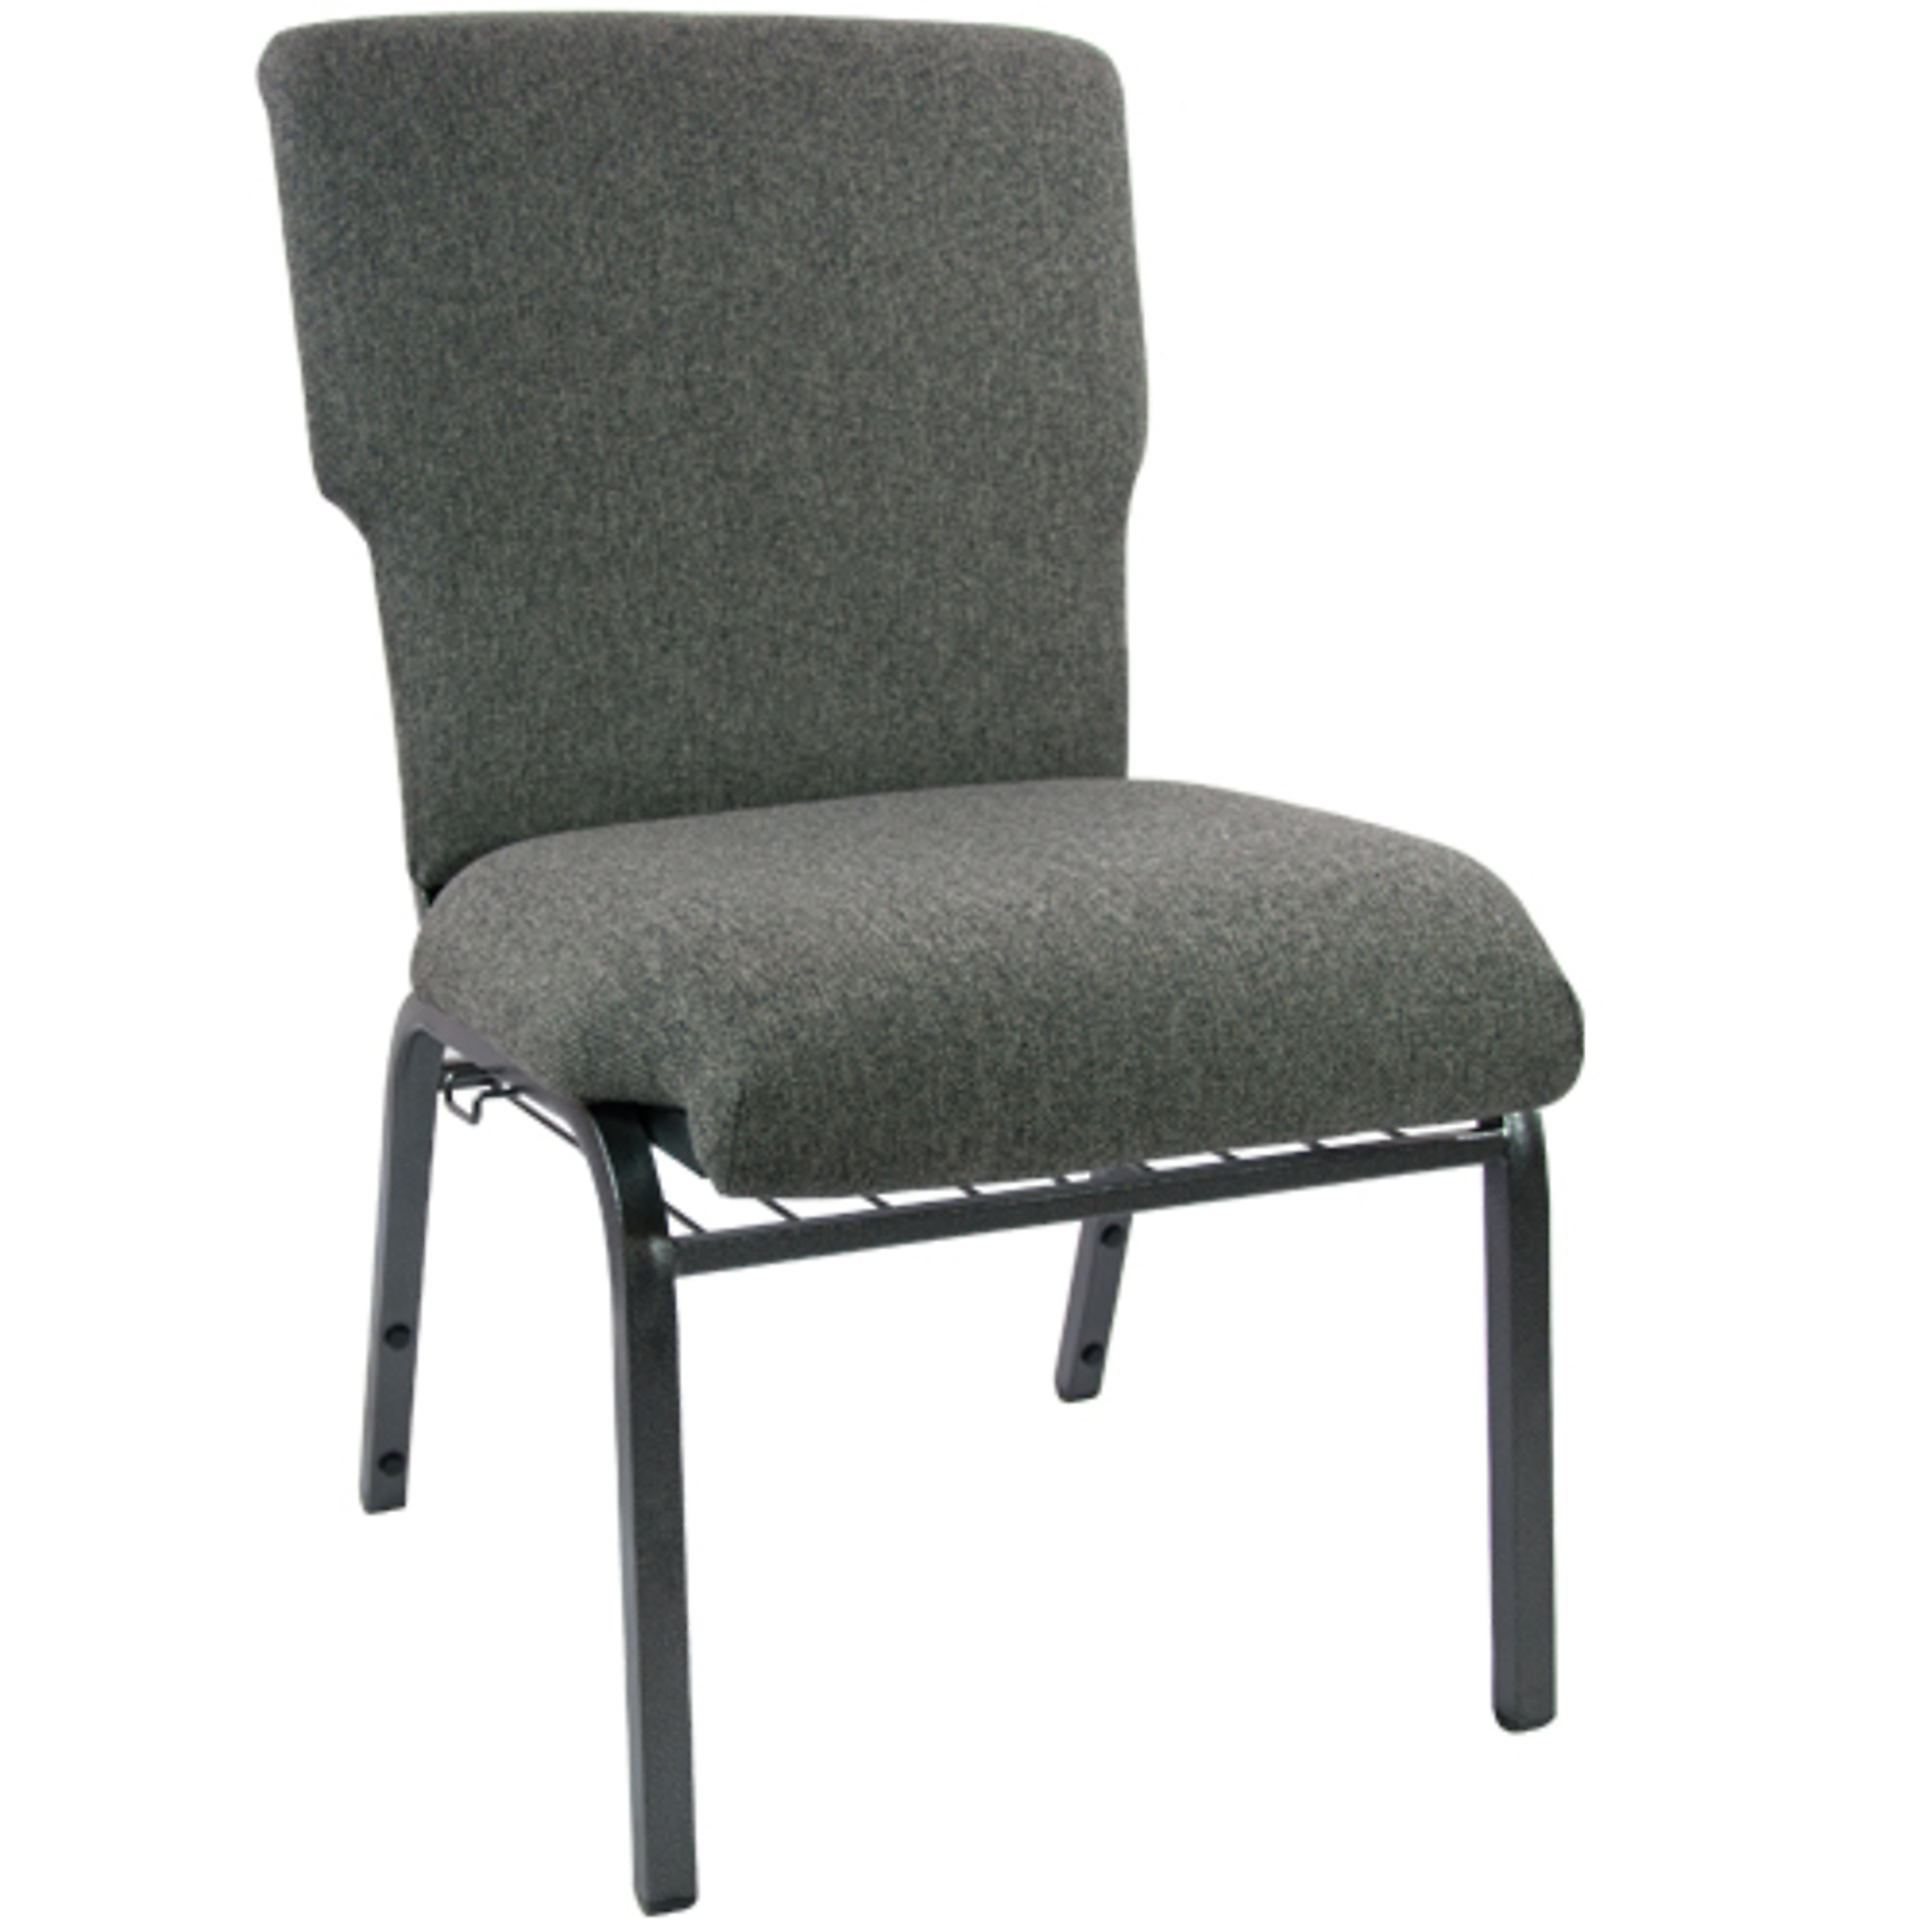 Flash Furniture, Charcoal Gray Discount Church Chair - 21Inch Wide, Primary Color Gray, Included (qty.) 1, Model EPCHT111